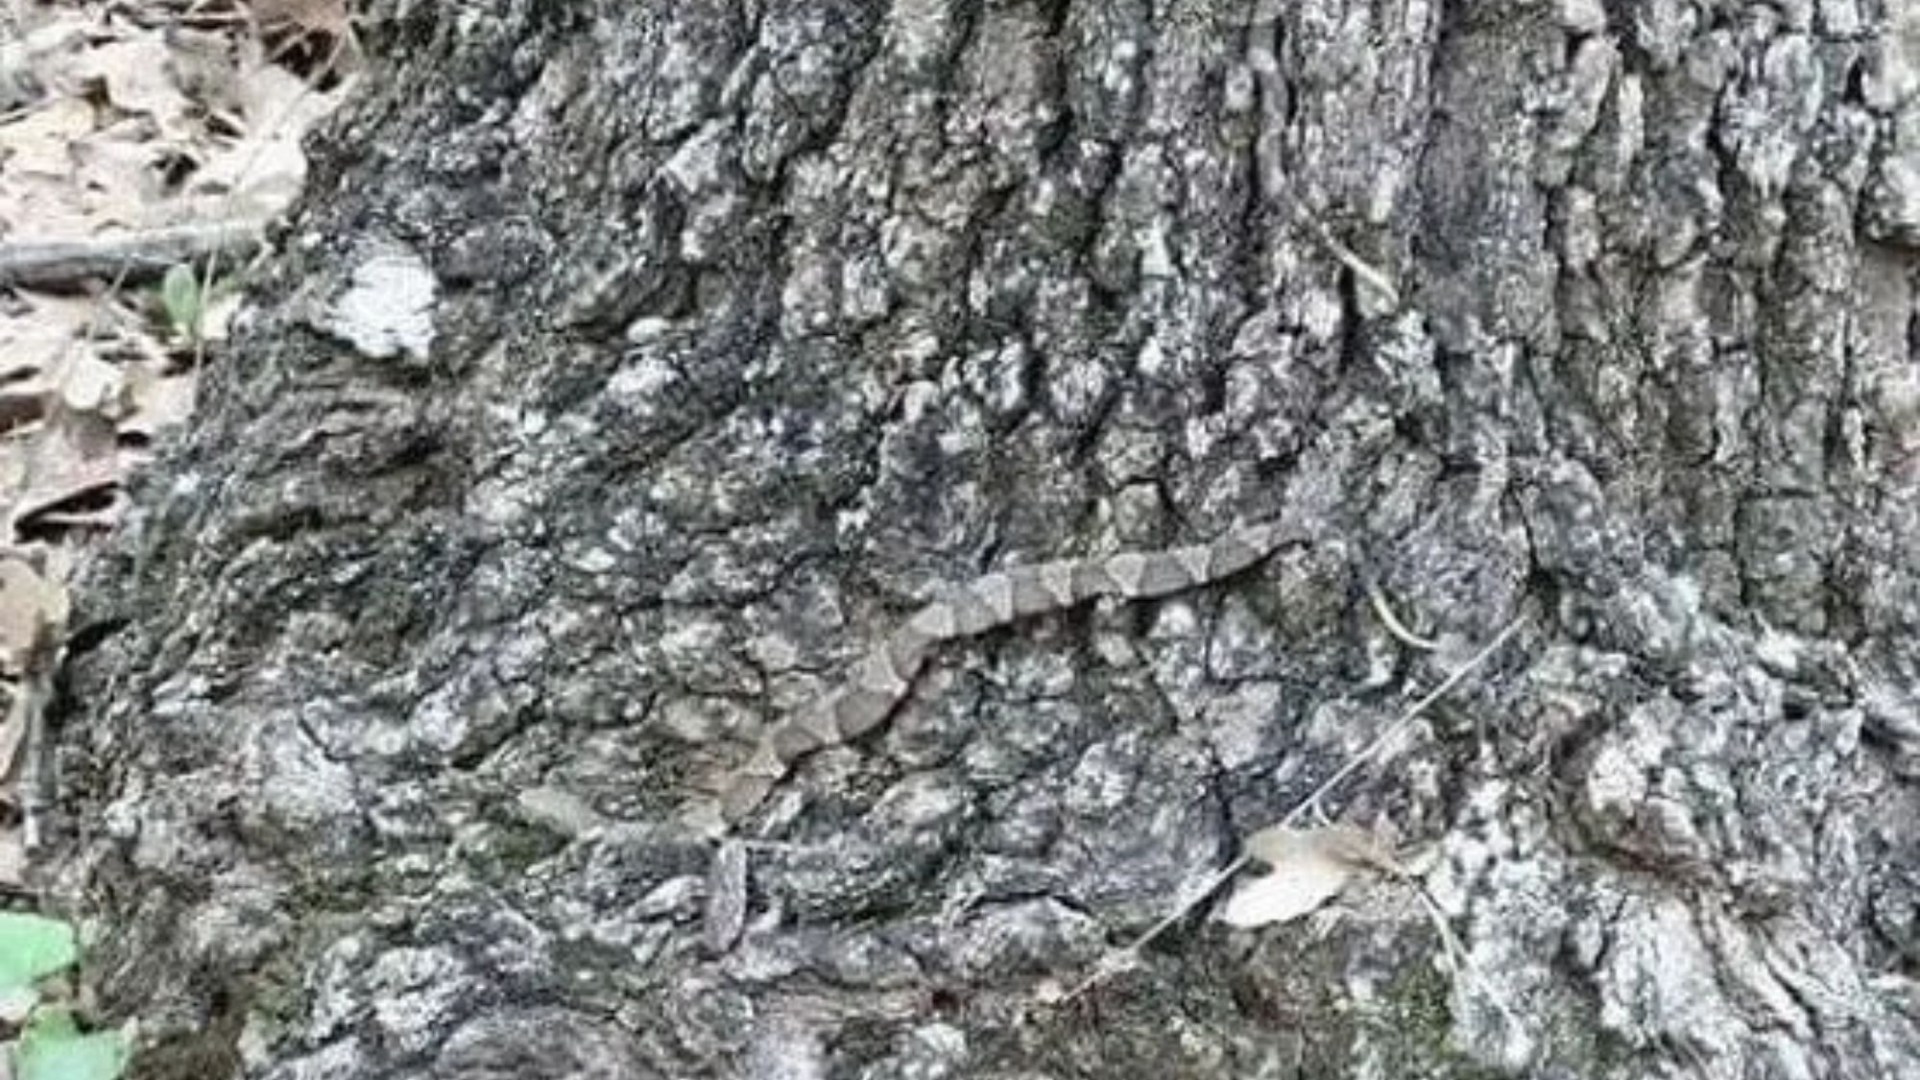 You have the eyes of a hawk if you can spot all three deadly copperhead snakes lurking in this tree in just 10 seconds